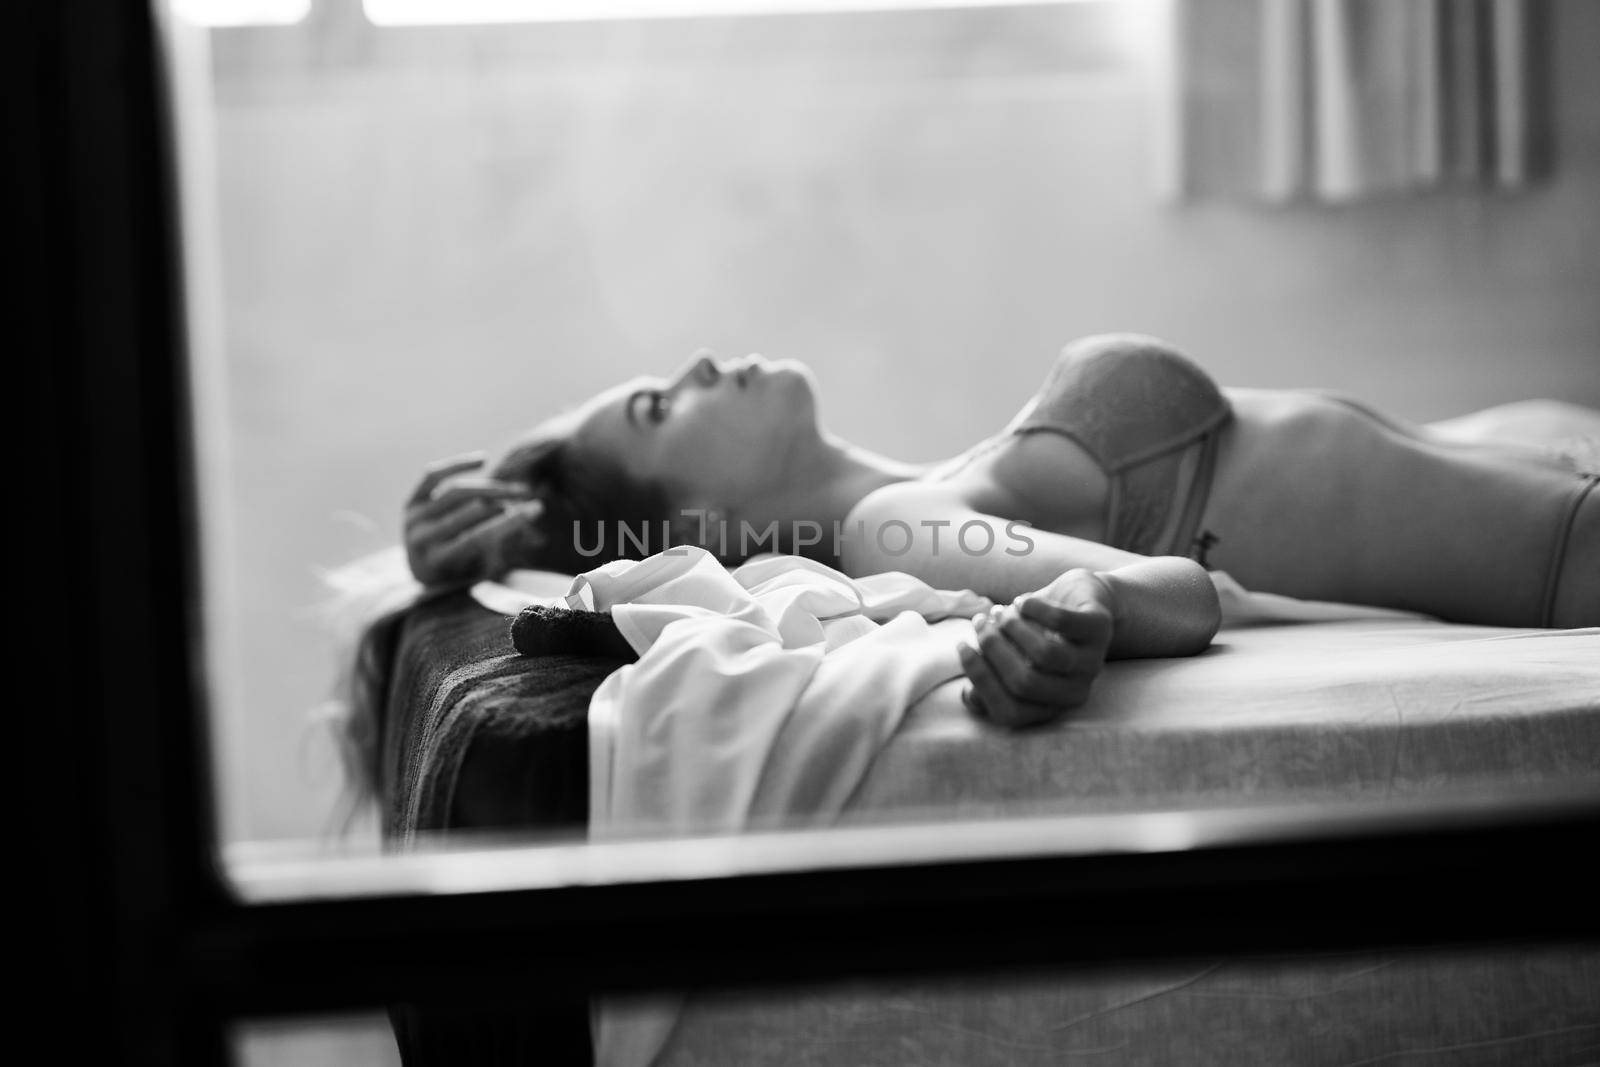 Defocused woman in lingerie lying on the bed. Black and white photograph with added art noise.